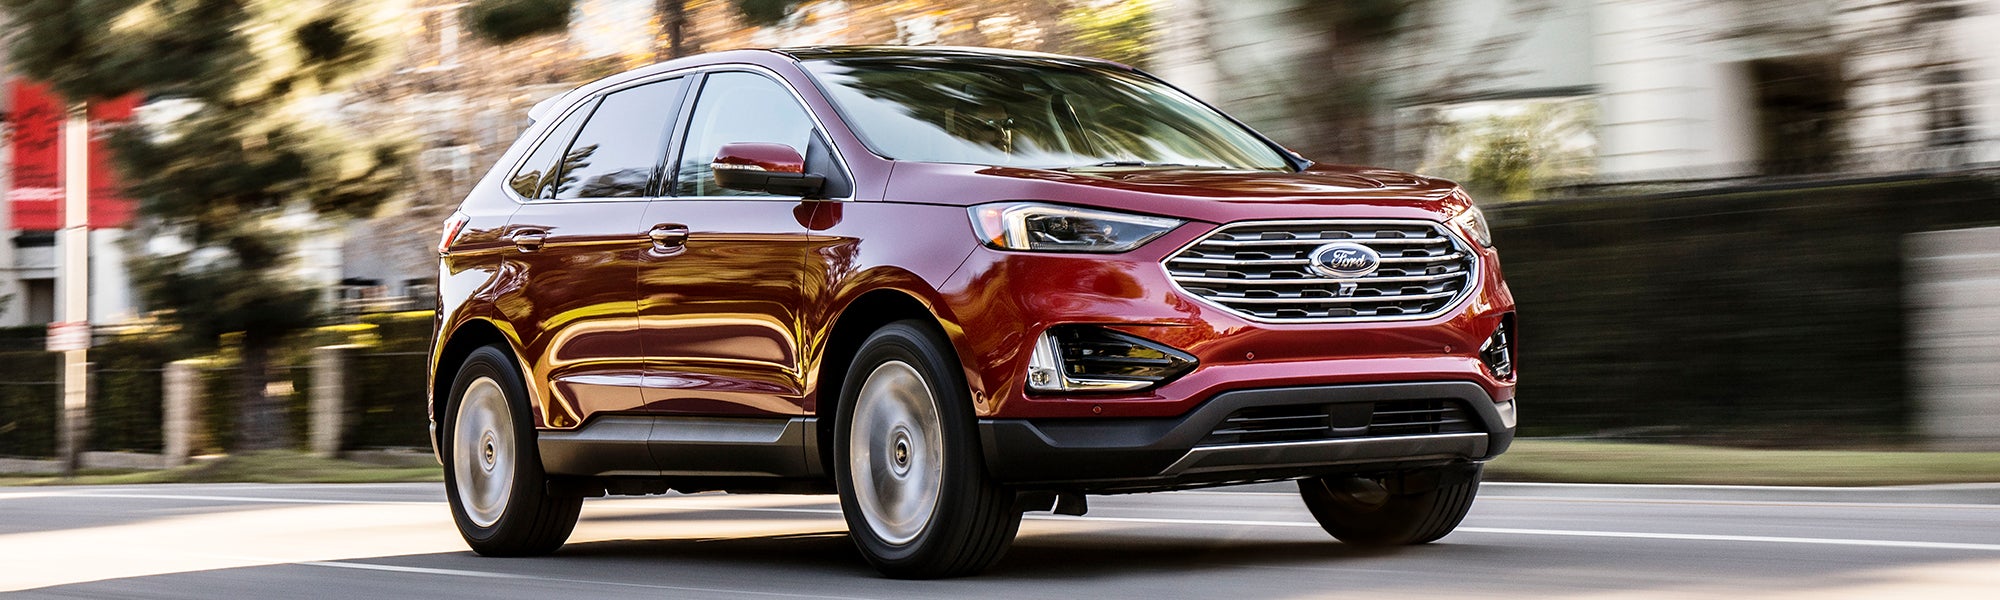 2020 Ford Edge | Interior & More | Bill McCandless Ford